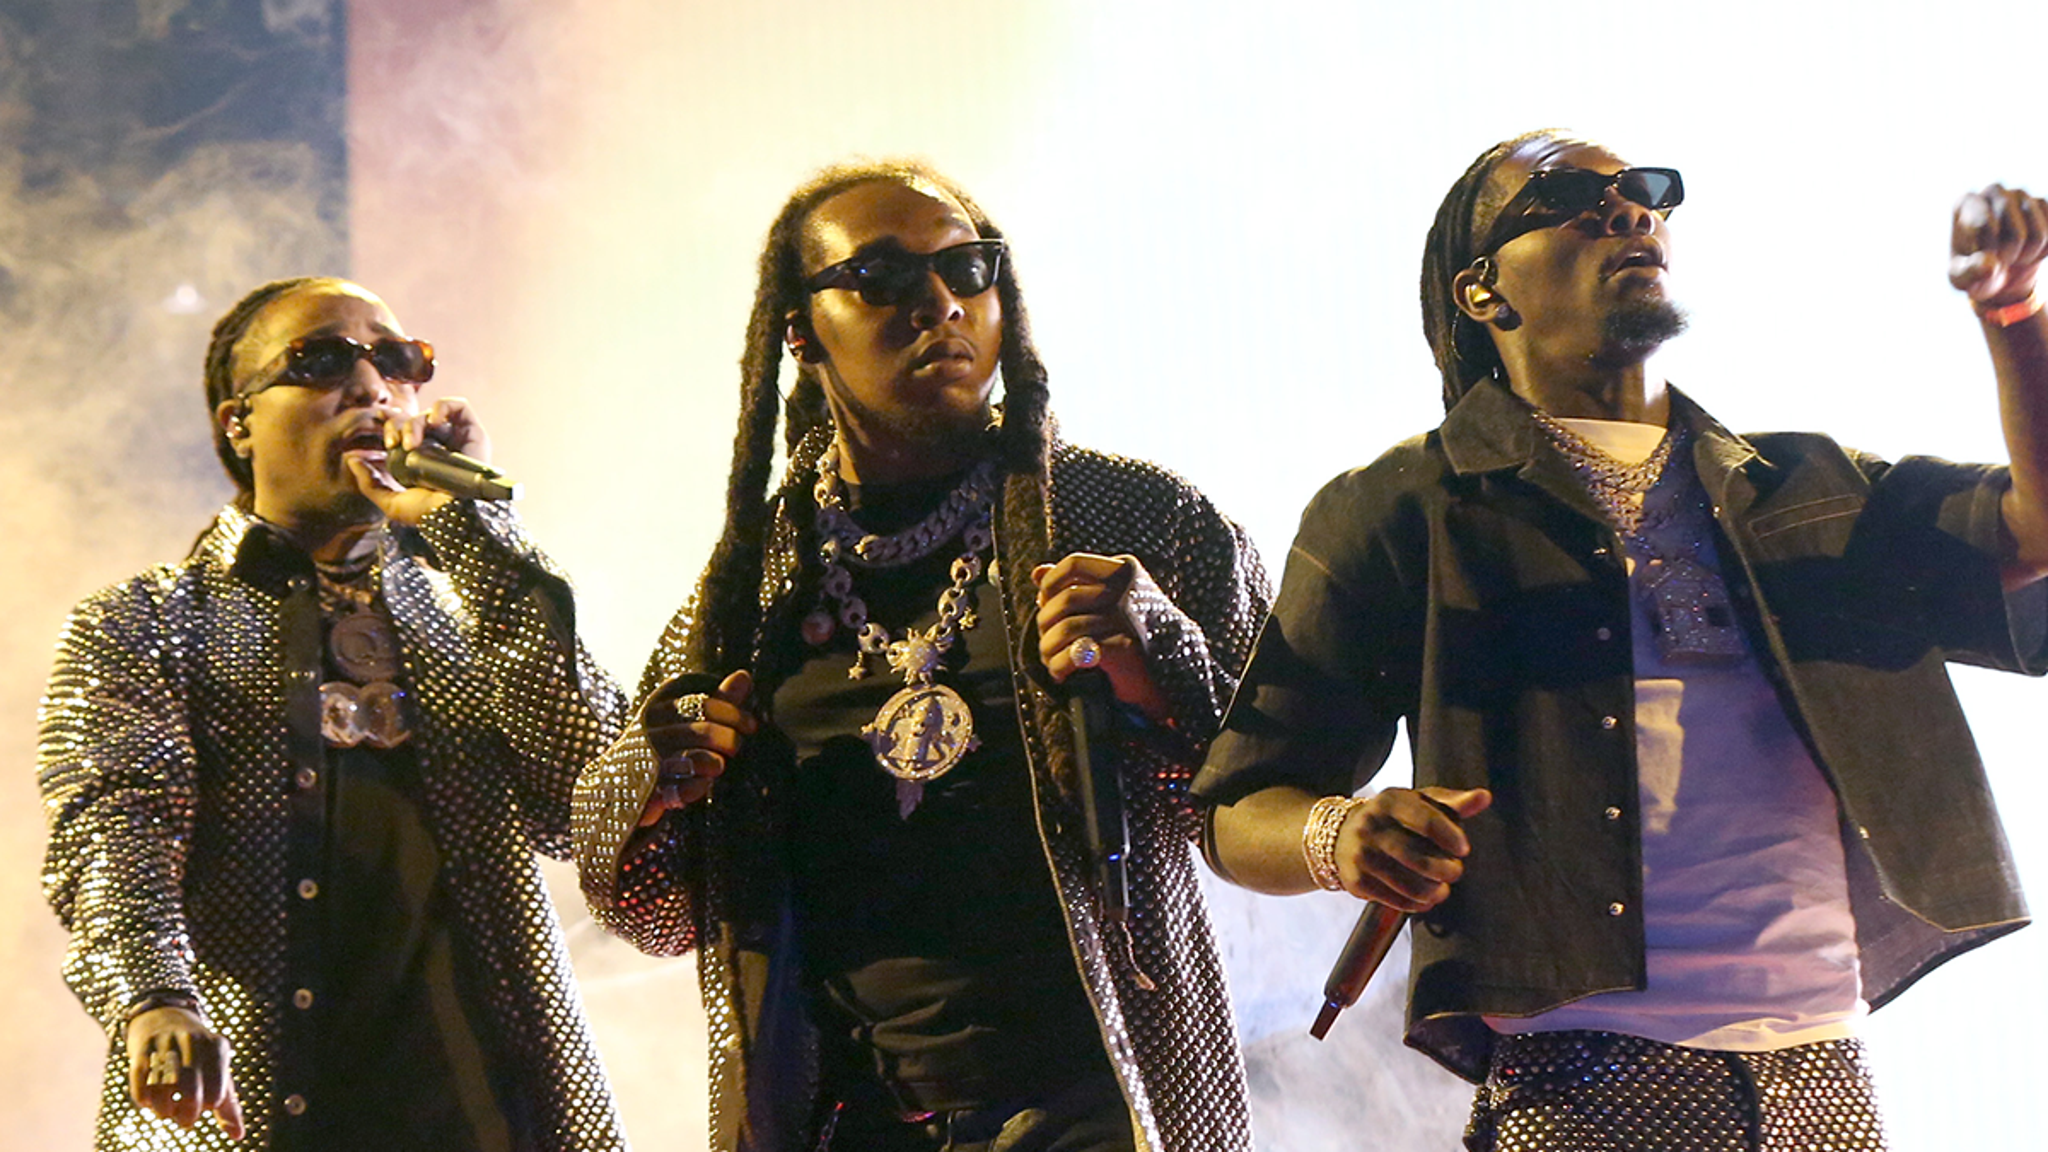 Migos' Offset and Quavo Pay Tribute to Takeoff Year After Fatal Shooting #Migos